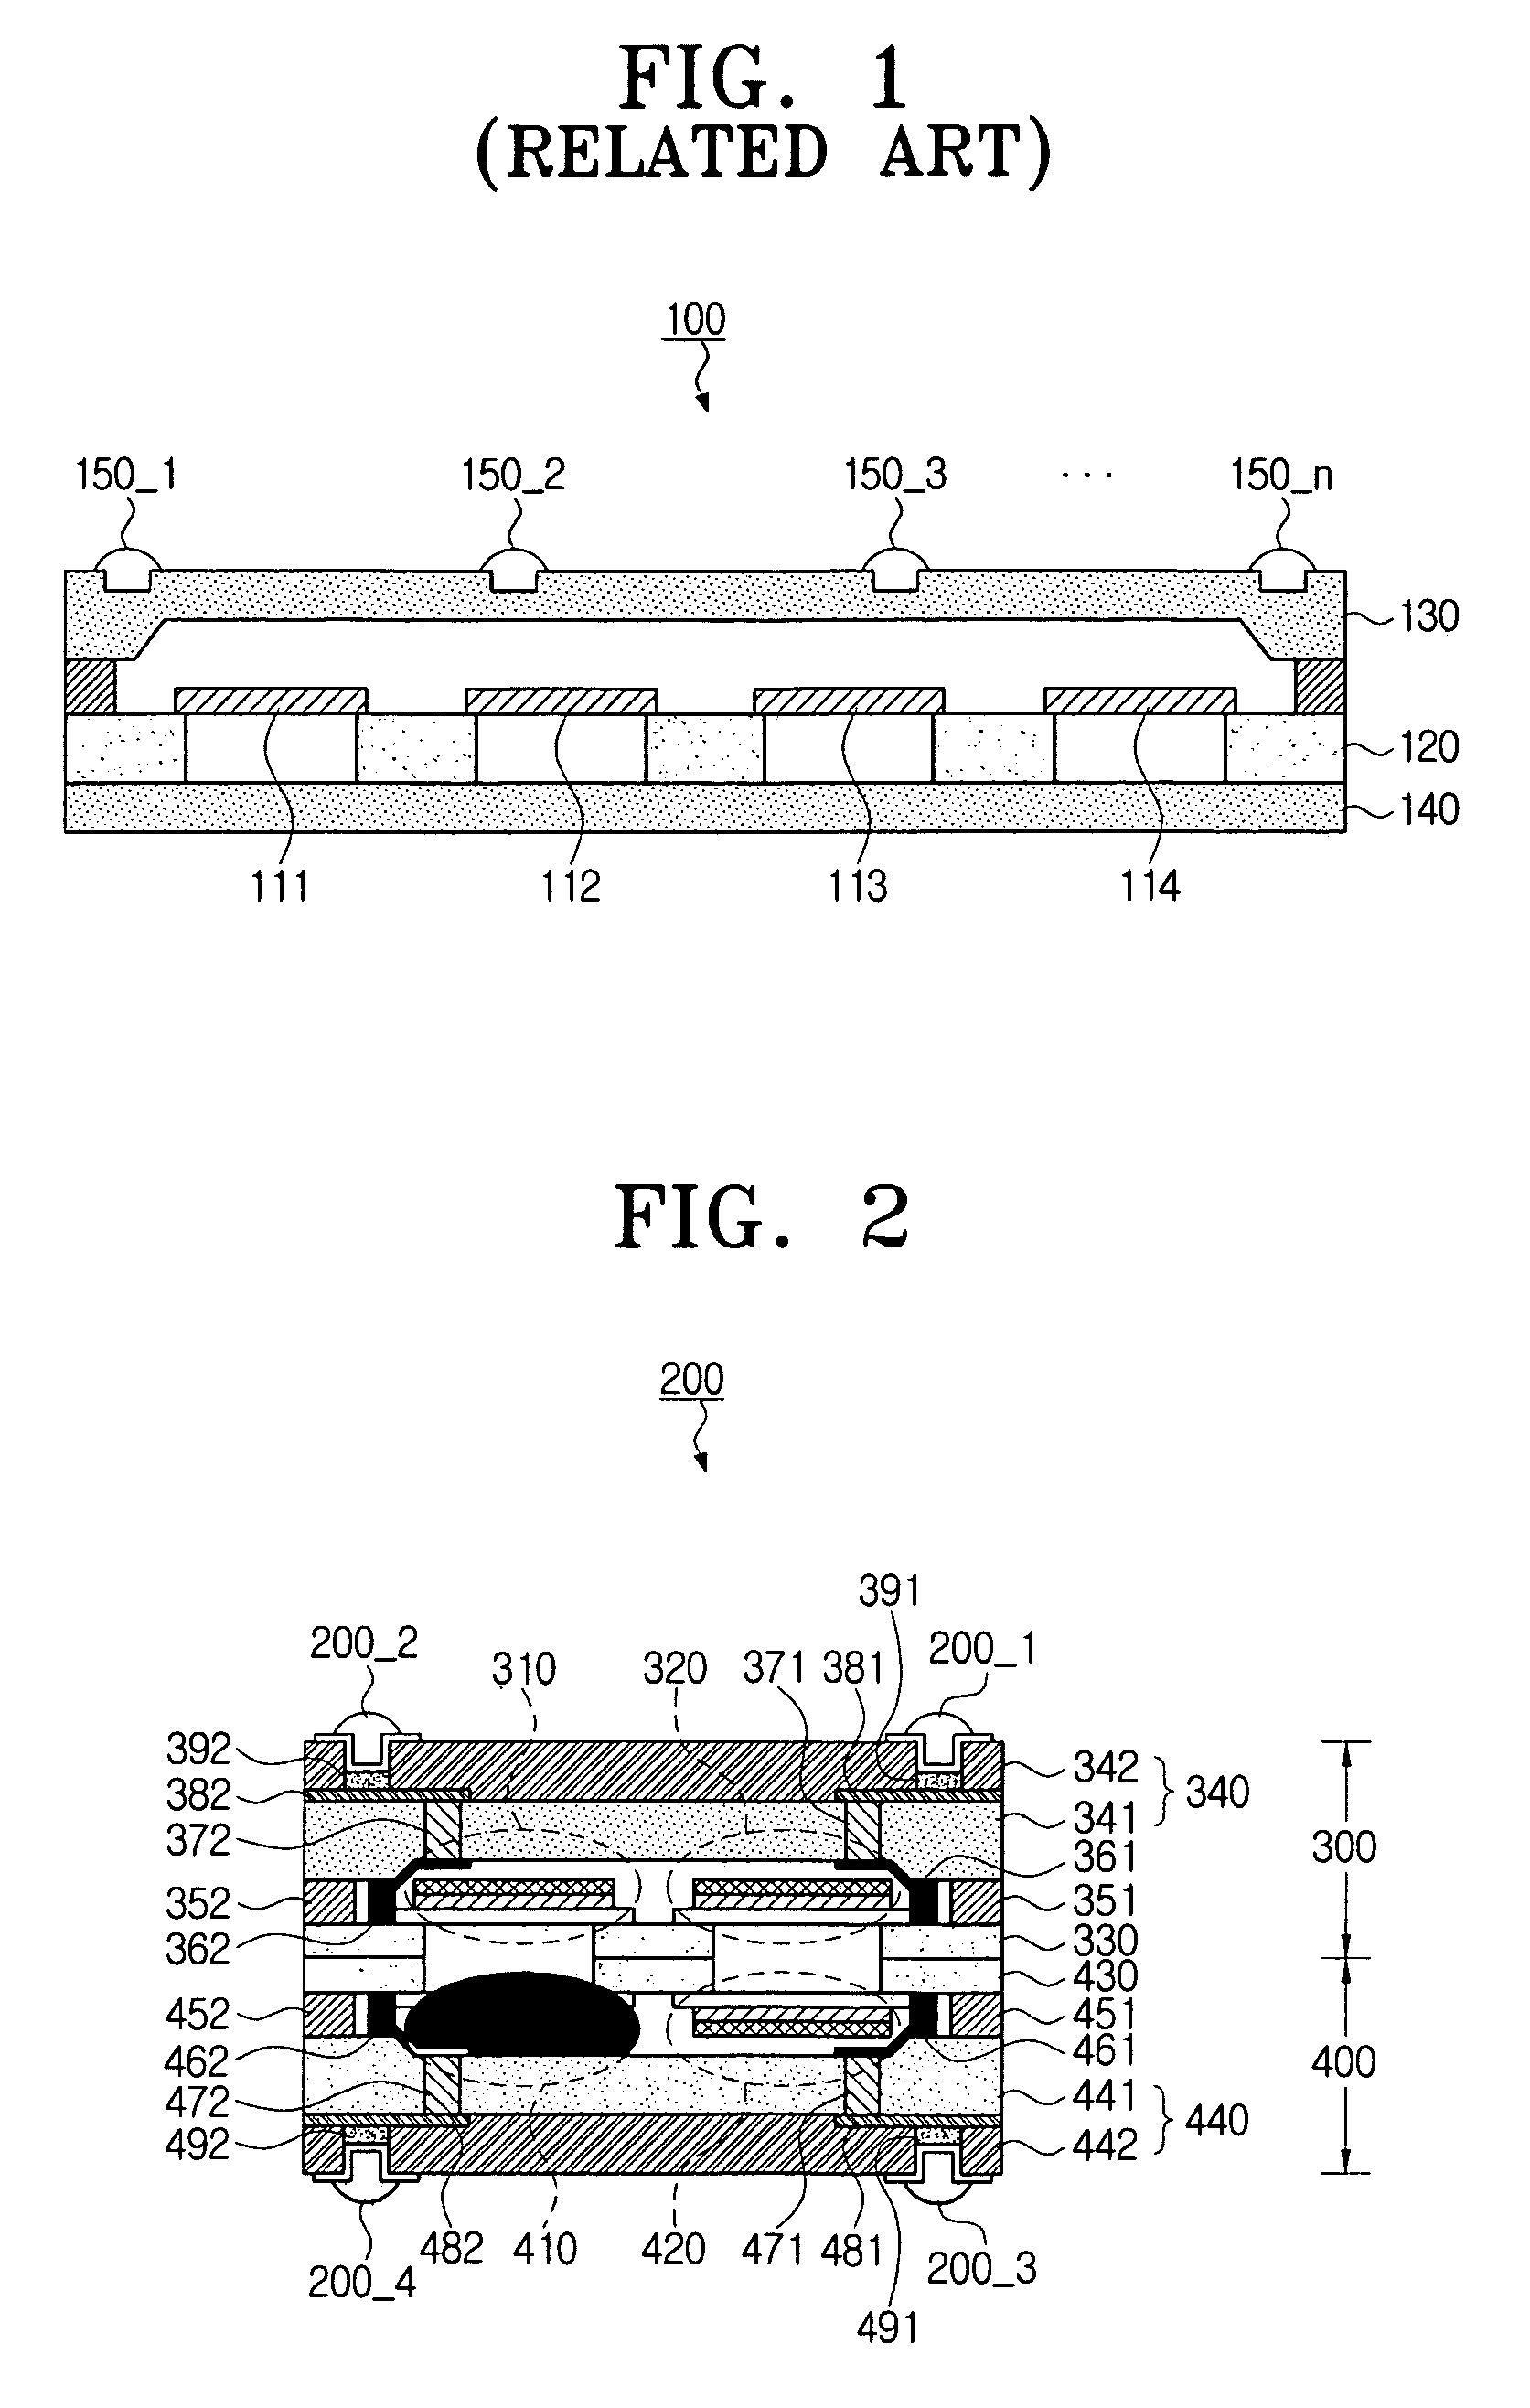 Multi-band filter module and method of fabricating the same